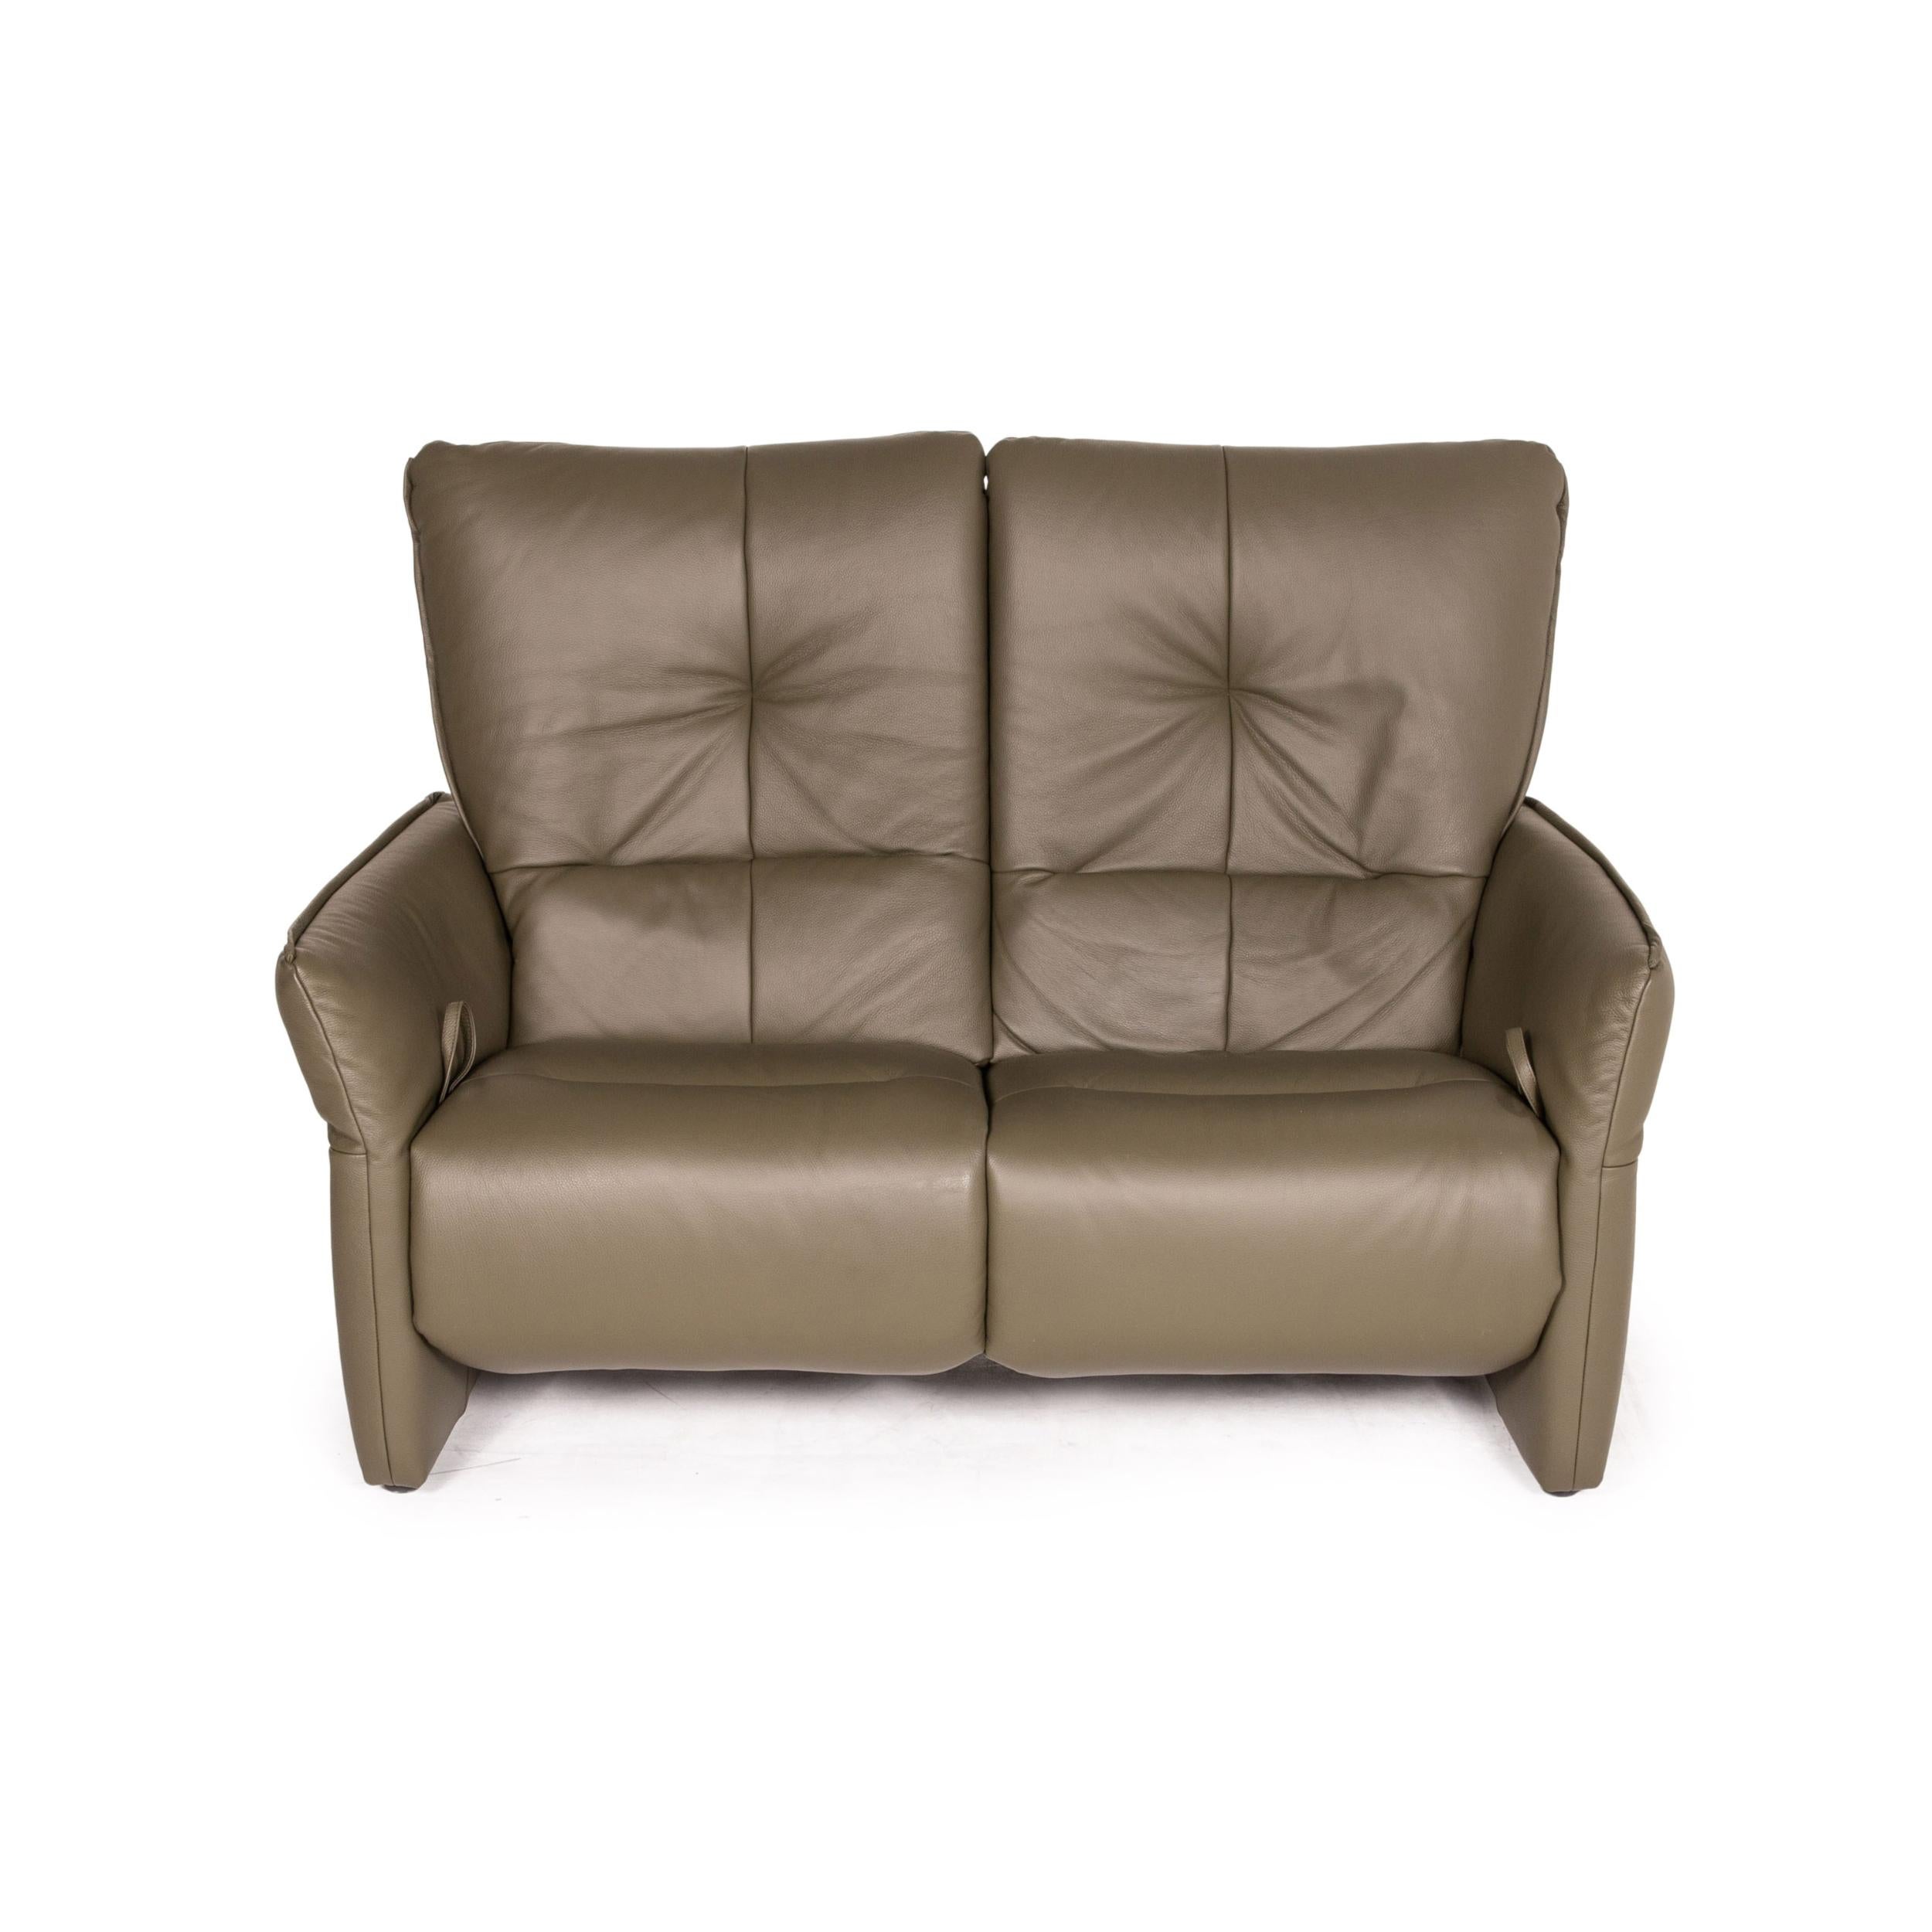 Himolla Cumuly Leather Sofa Set Olive Green 1x Three-Seater 1x Two-Seater 8